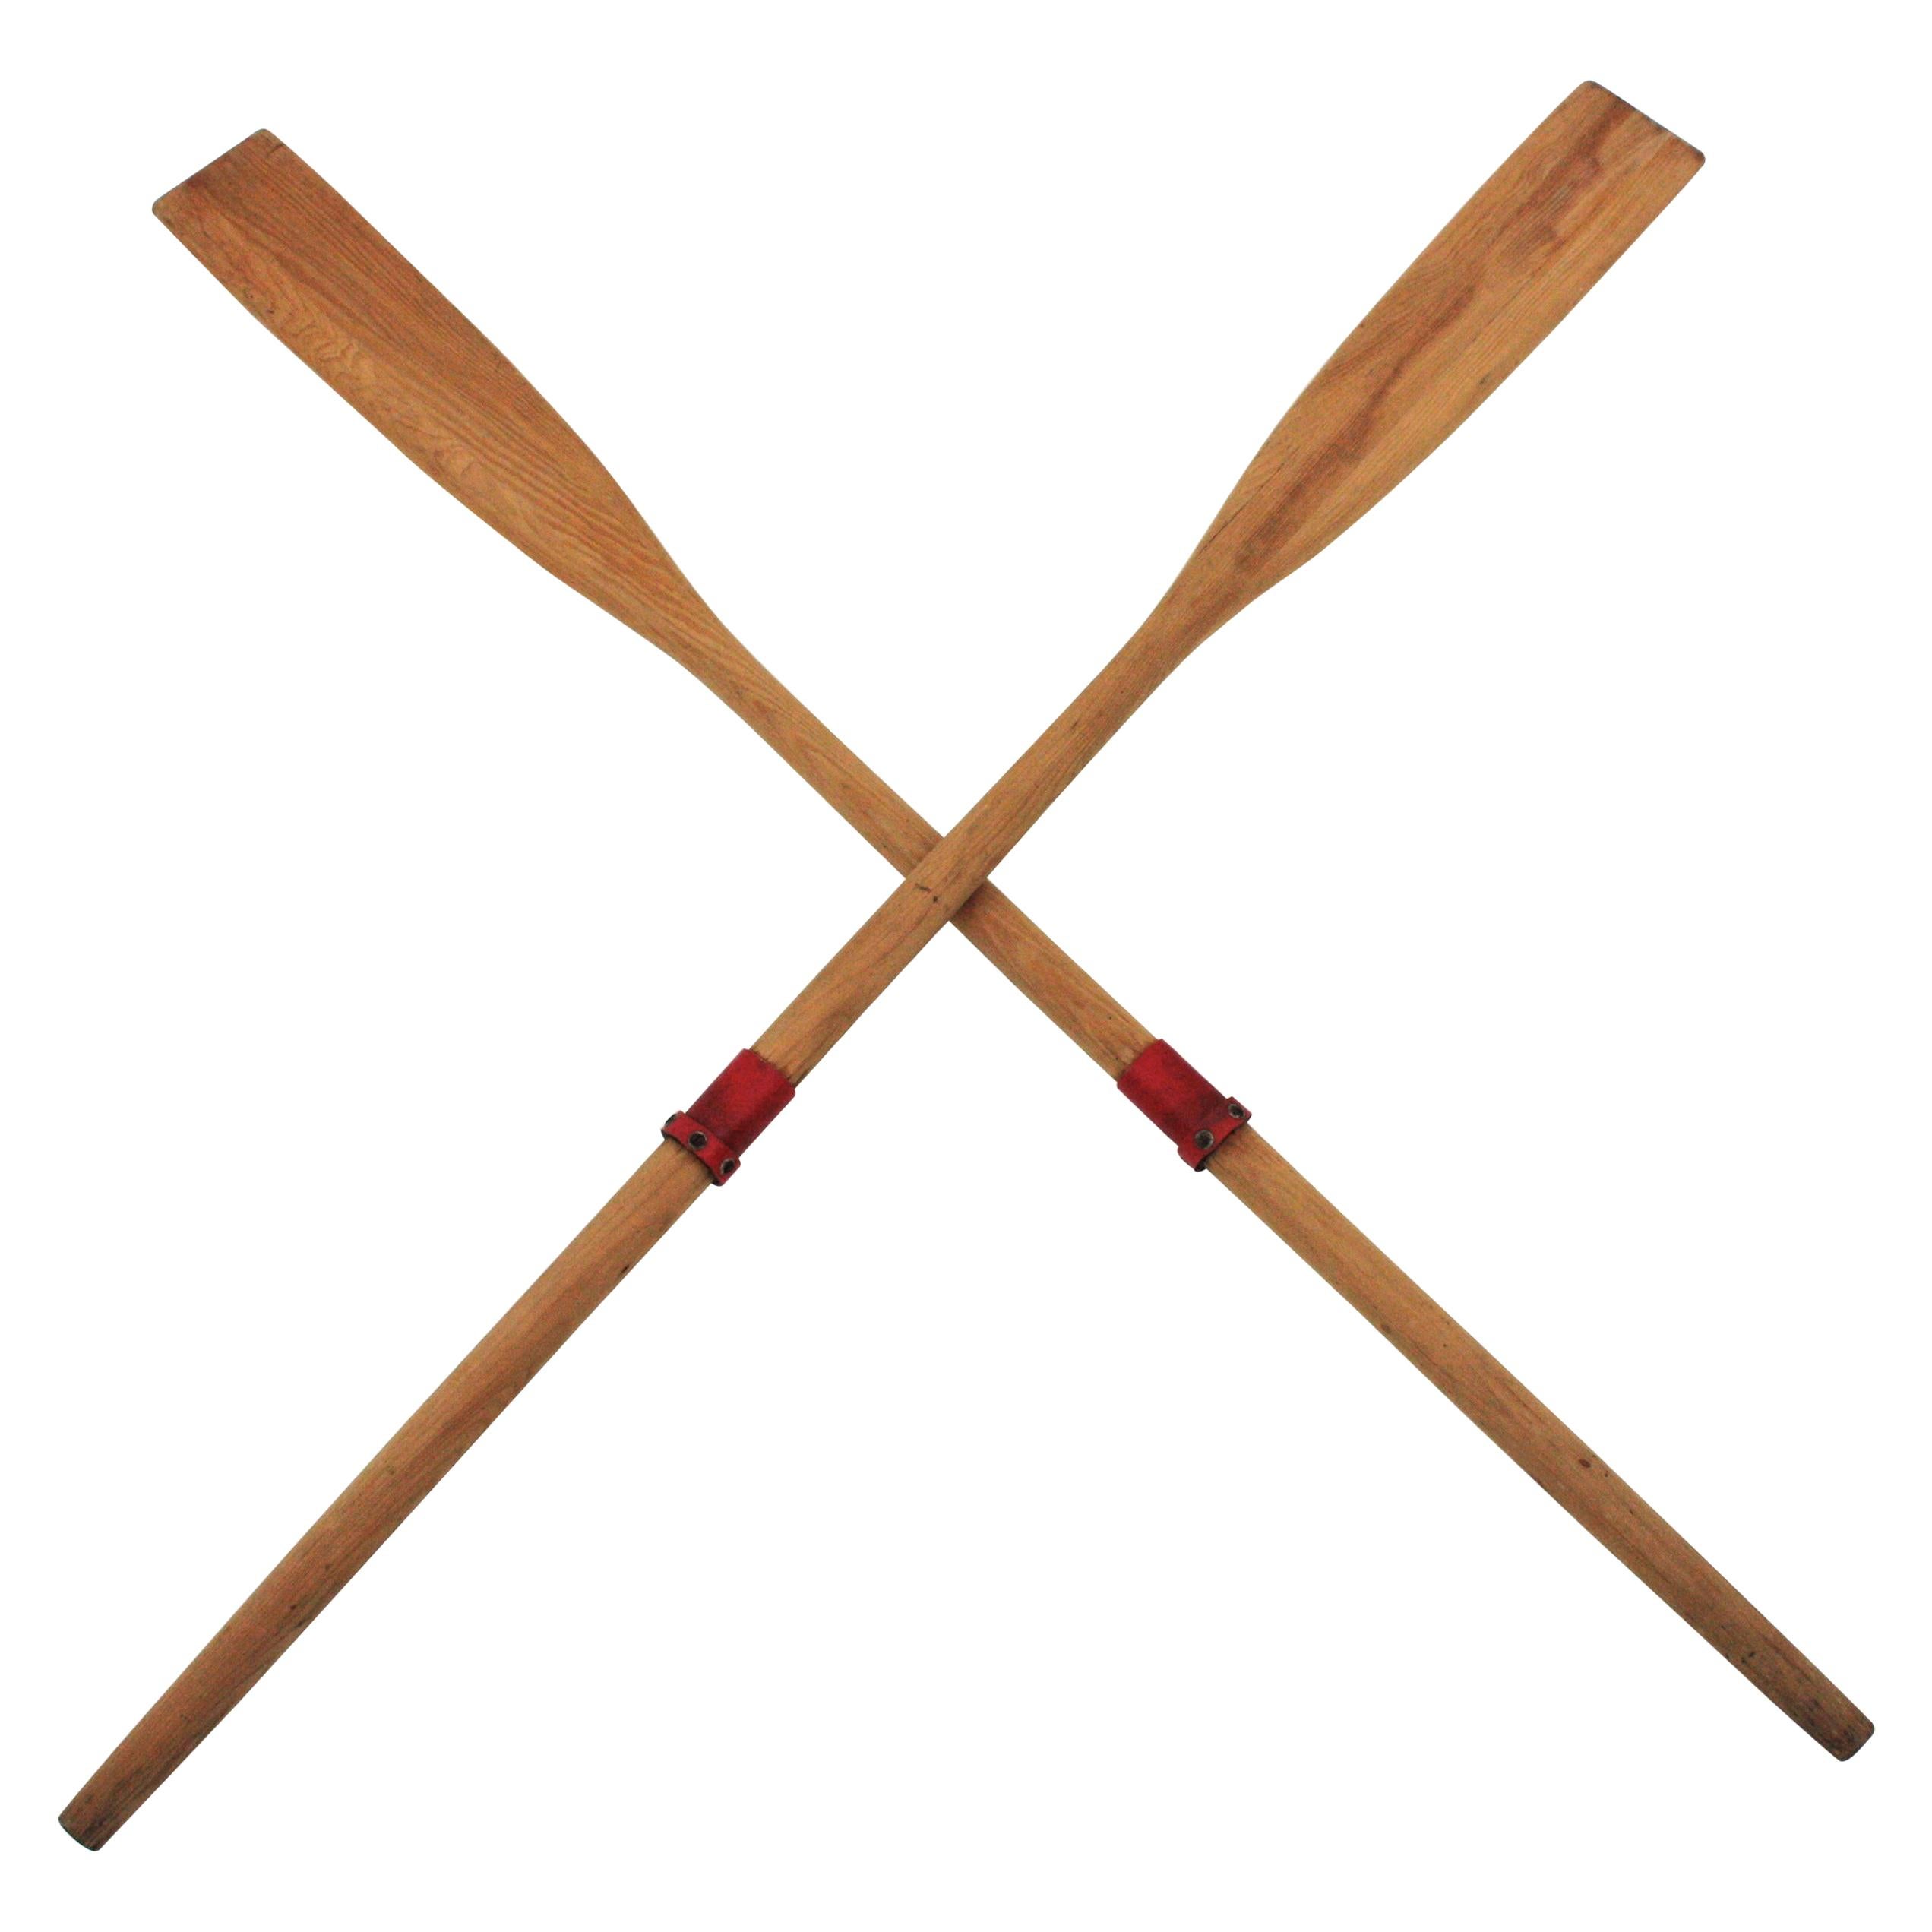 Pair of Spanish Boat Oars or Wooden Paddles